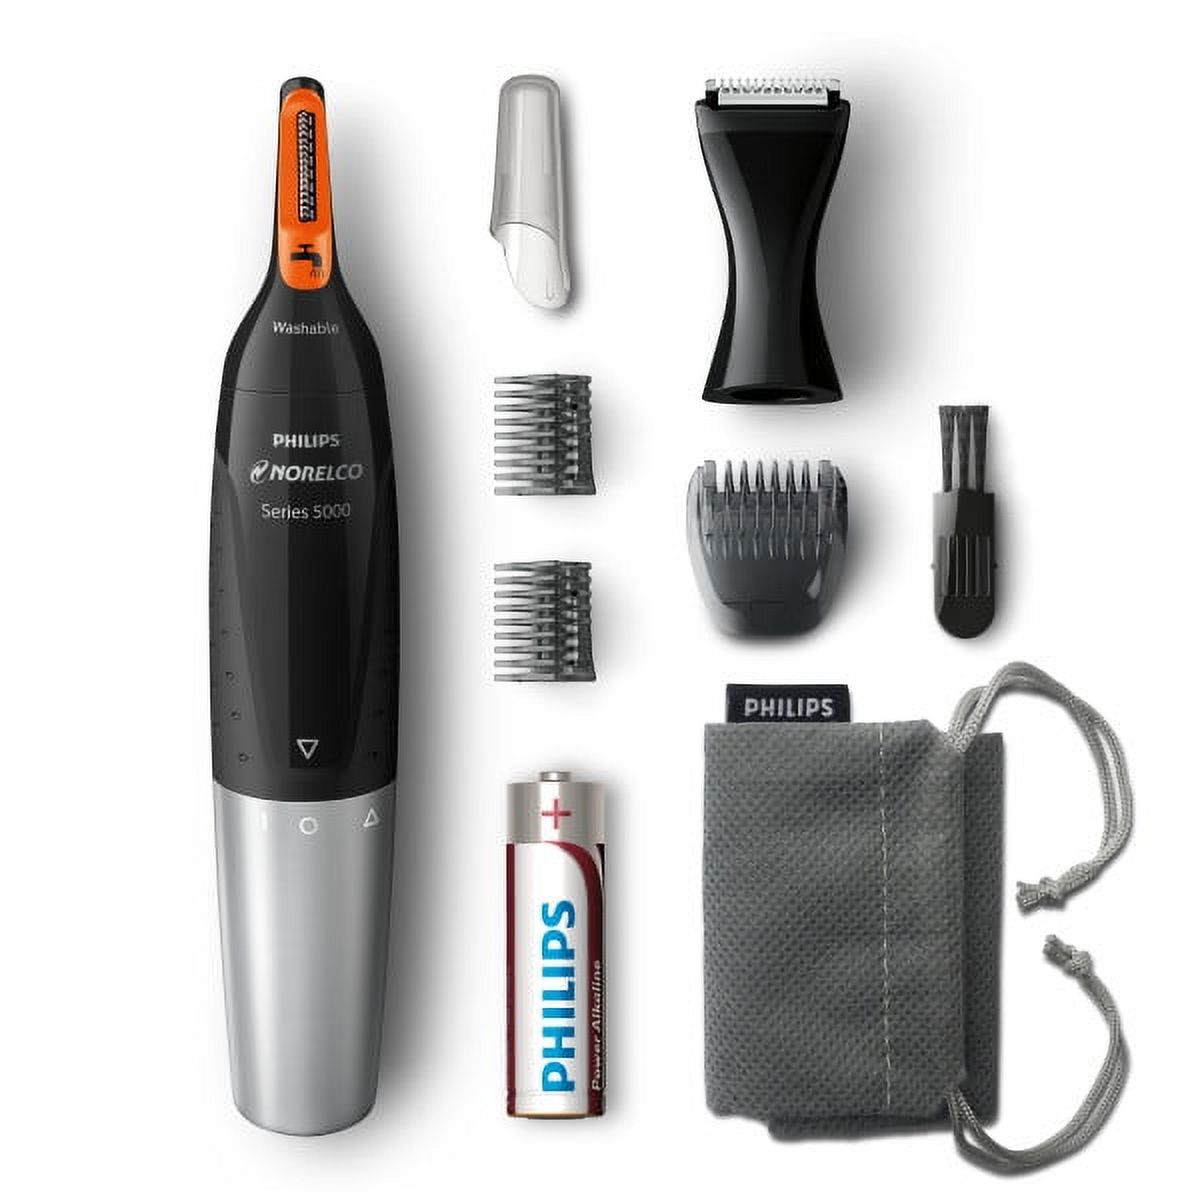 Philips Norelco Series 5000 Nosetrimmer 5100, Nose, Eyebrow and Ear Trimmer, NT5175/49 - image 1 of 2